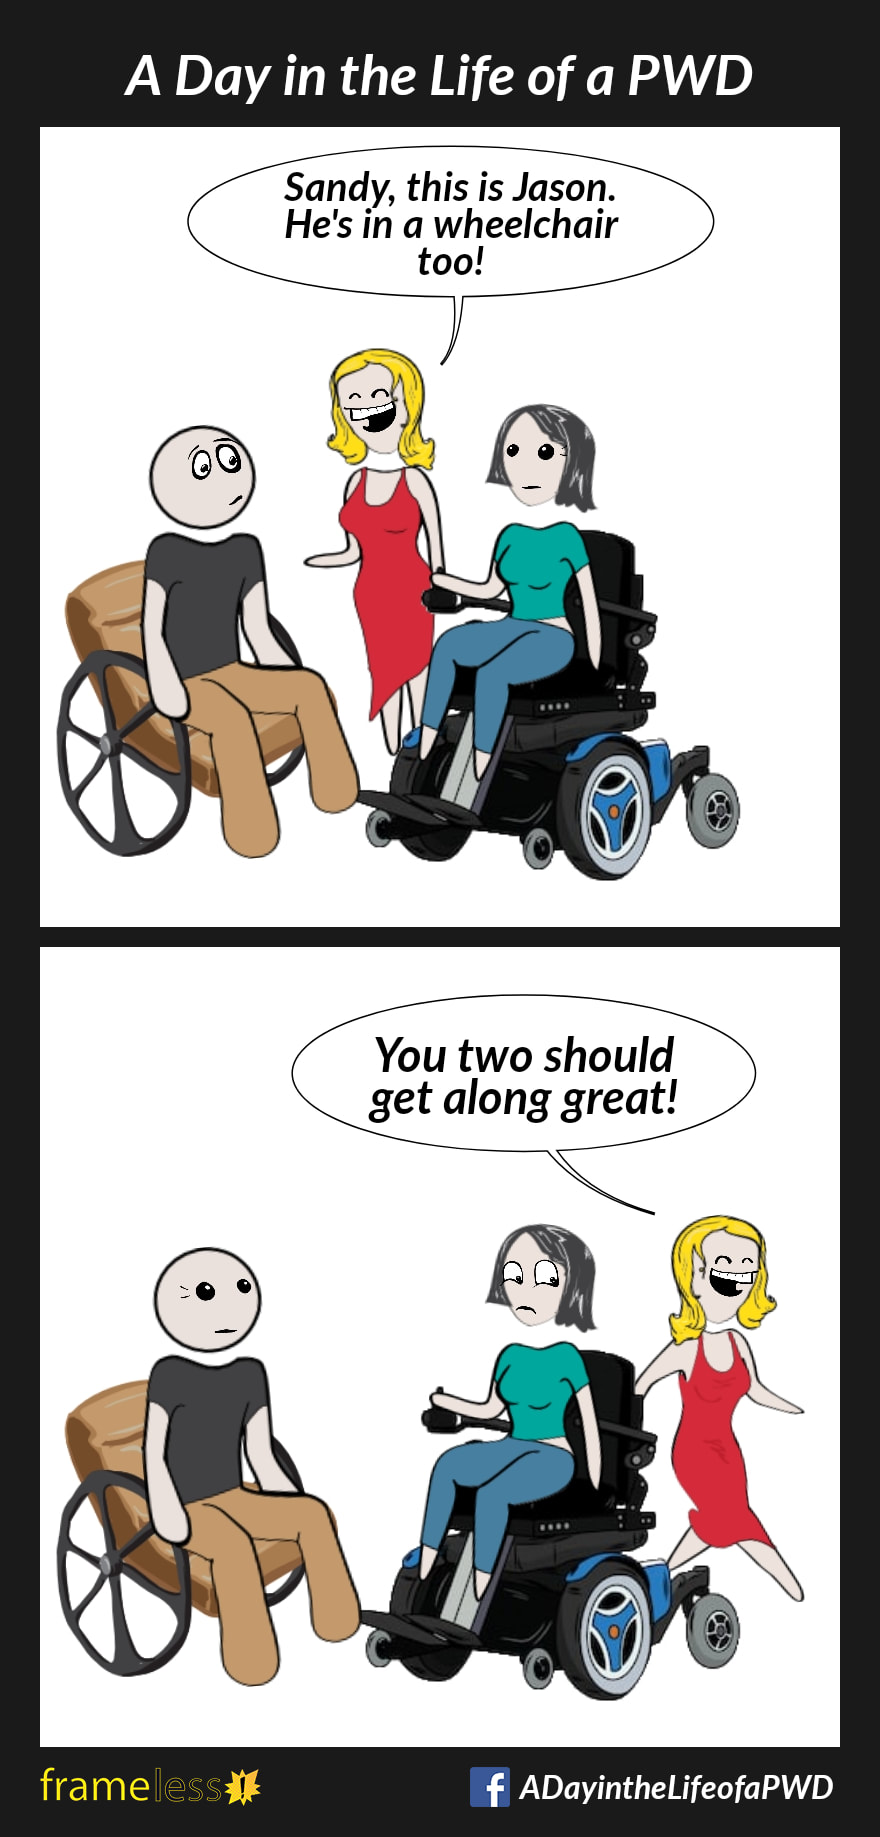 COMIC STRIP 
A Day in the Life of a PWD (Person With a Disability) 

Frame 1:
A grinning woman introduces a male manual wheelchair user and a female power wheelchair user to each other.
WOMAN: Sandy, this is Jason. He's in a wheelchair too!

Frame 2:
WOMAN (walking away happily): You two should get along great!